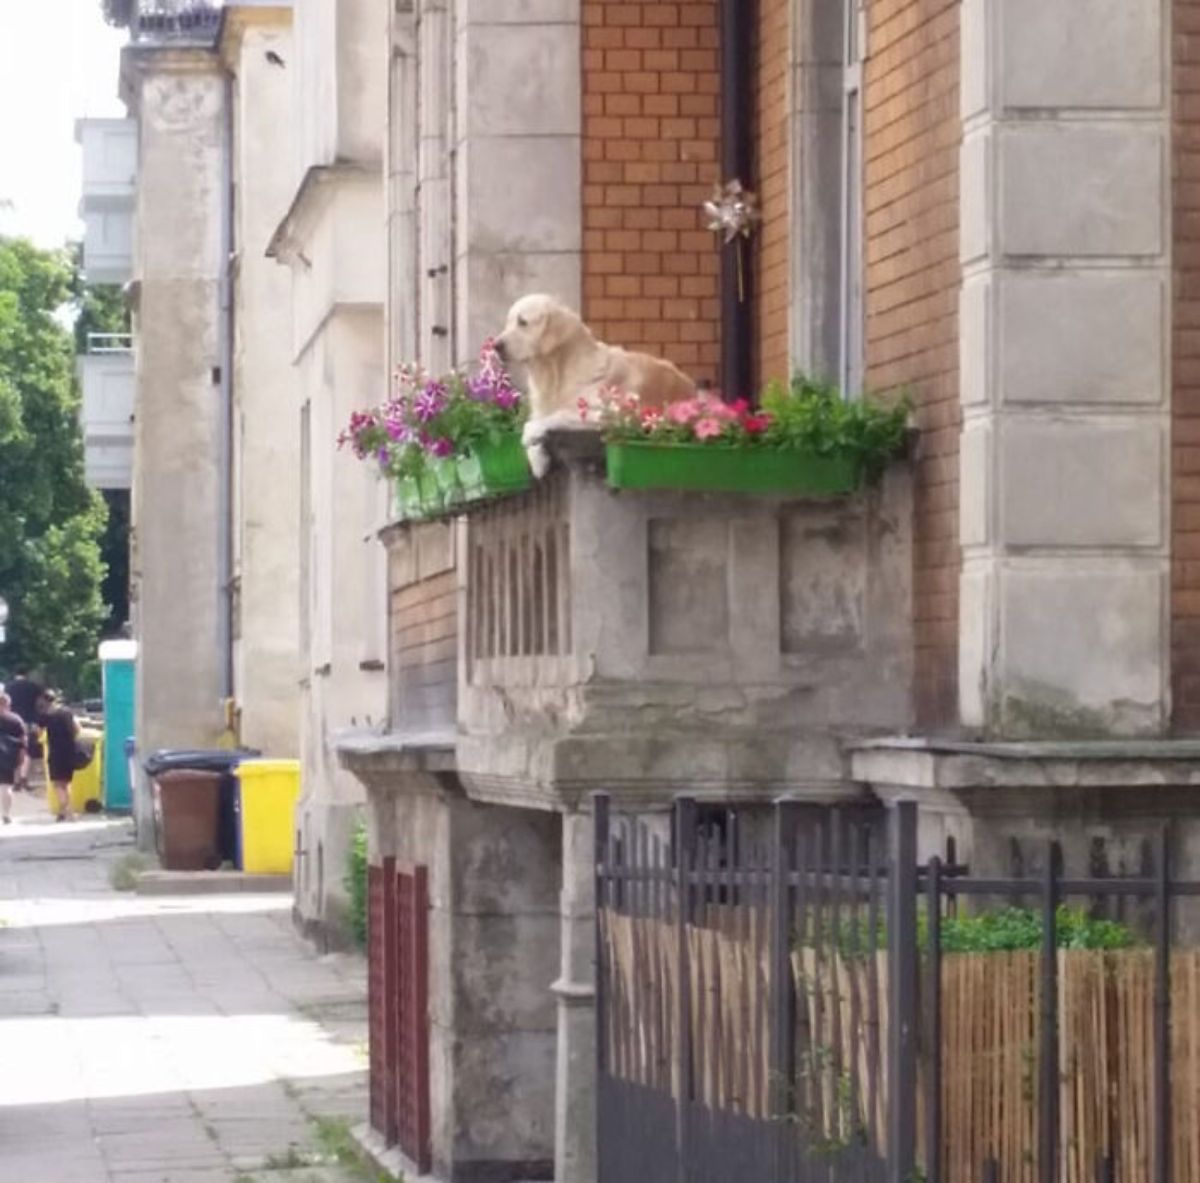 golden retriever hanging over a balcony next to green flower pots with lots of pink flowers